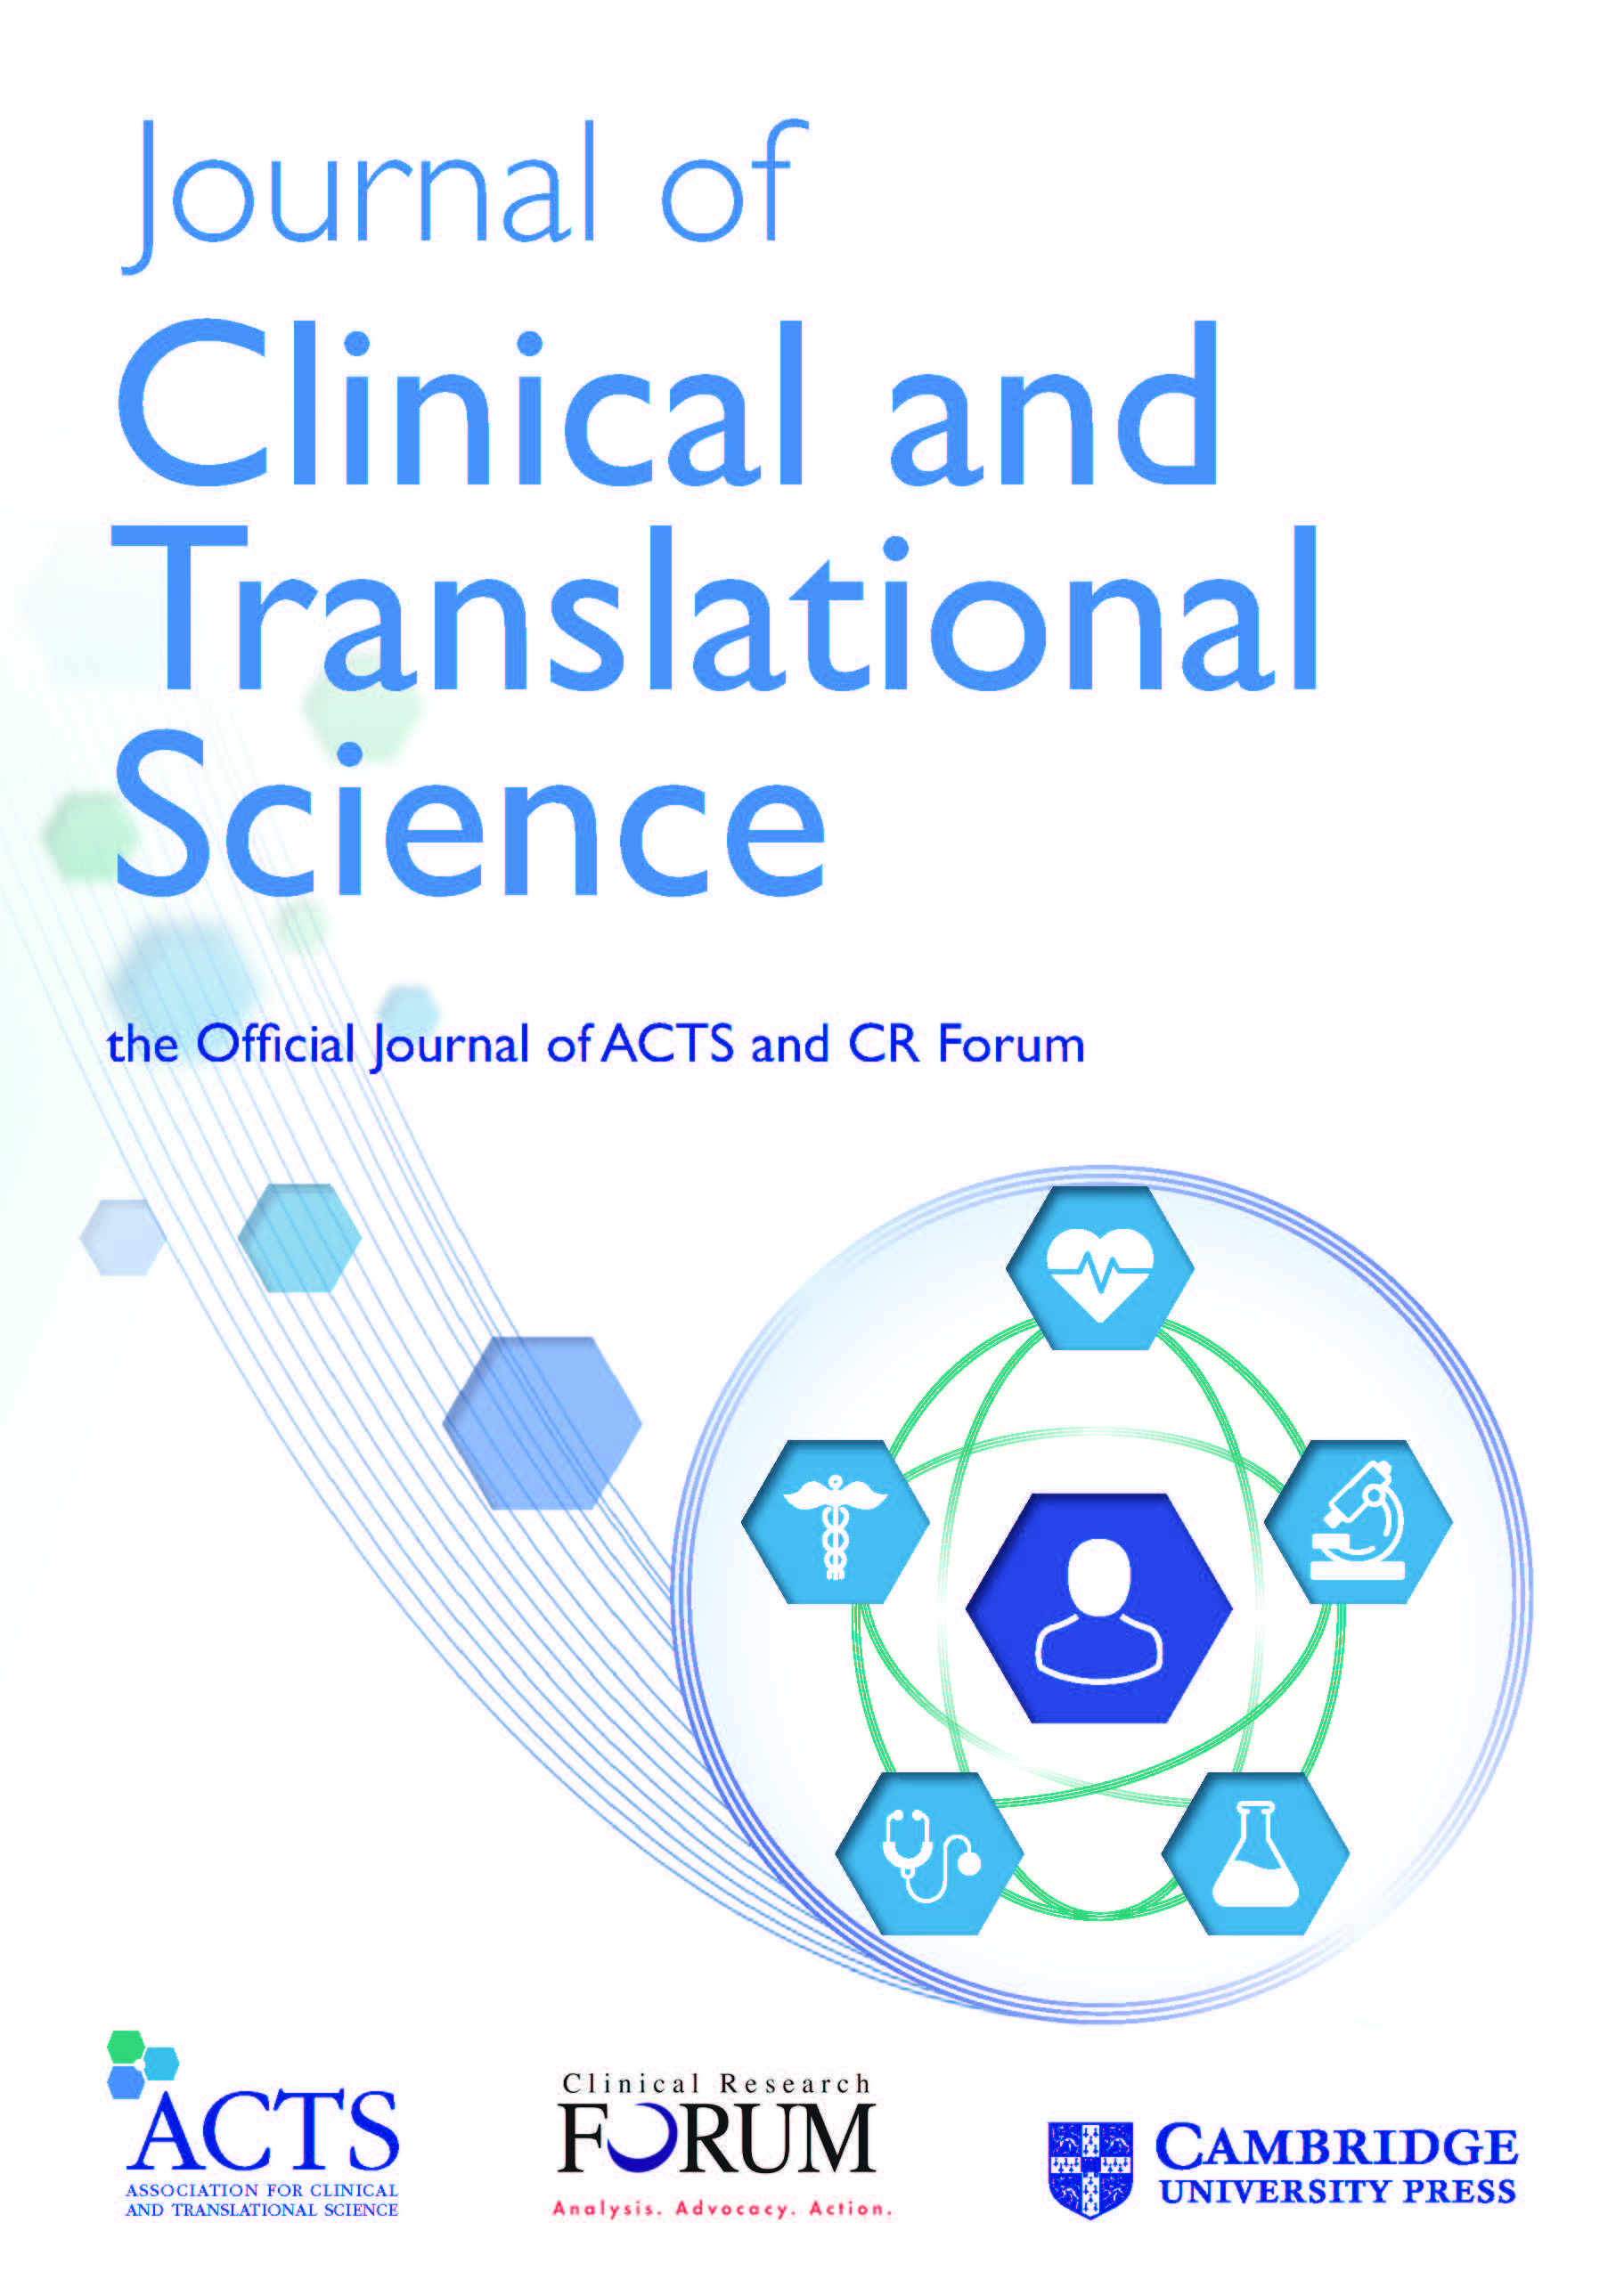 journal_of-clinical-and-translational-science.jpg